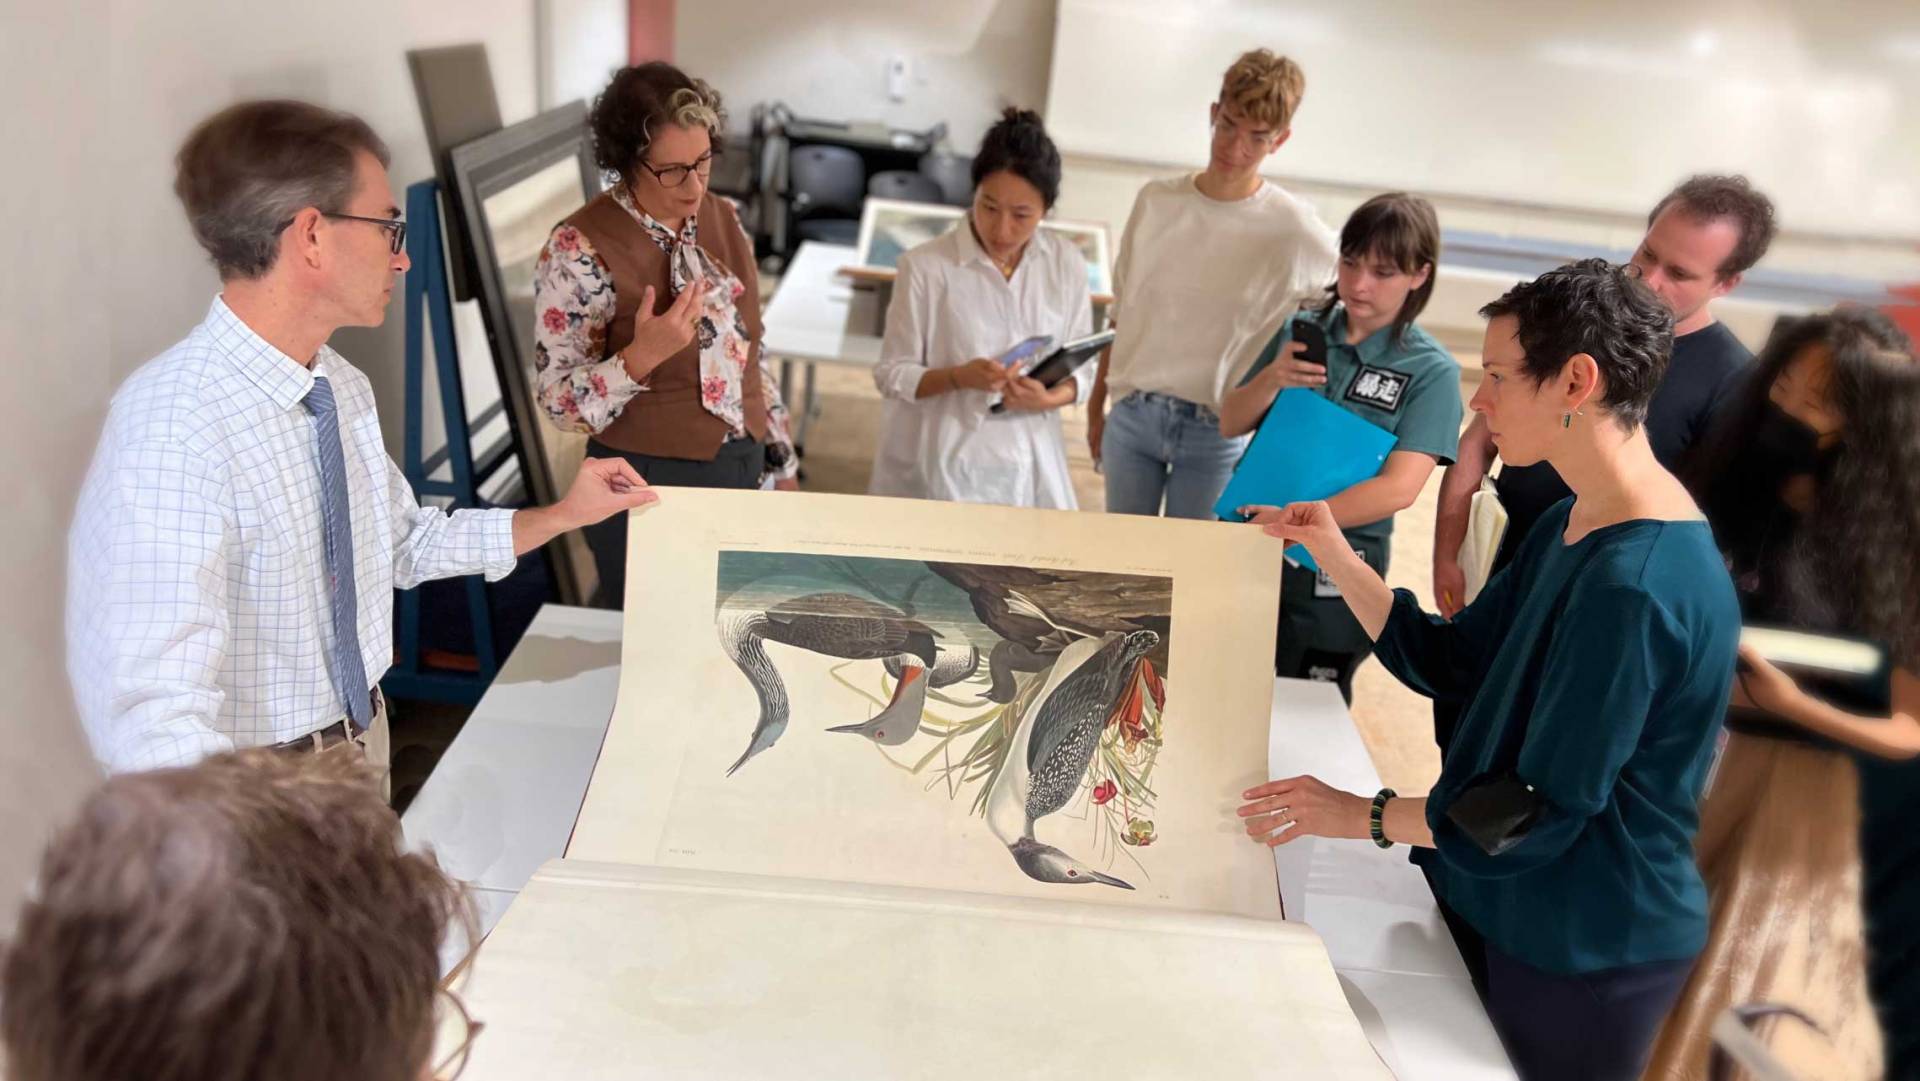 Rachael DeLue lectures about the bird print in a rare book